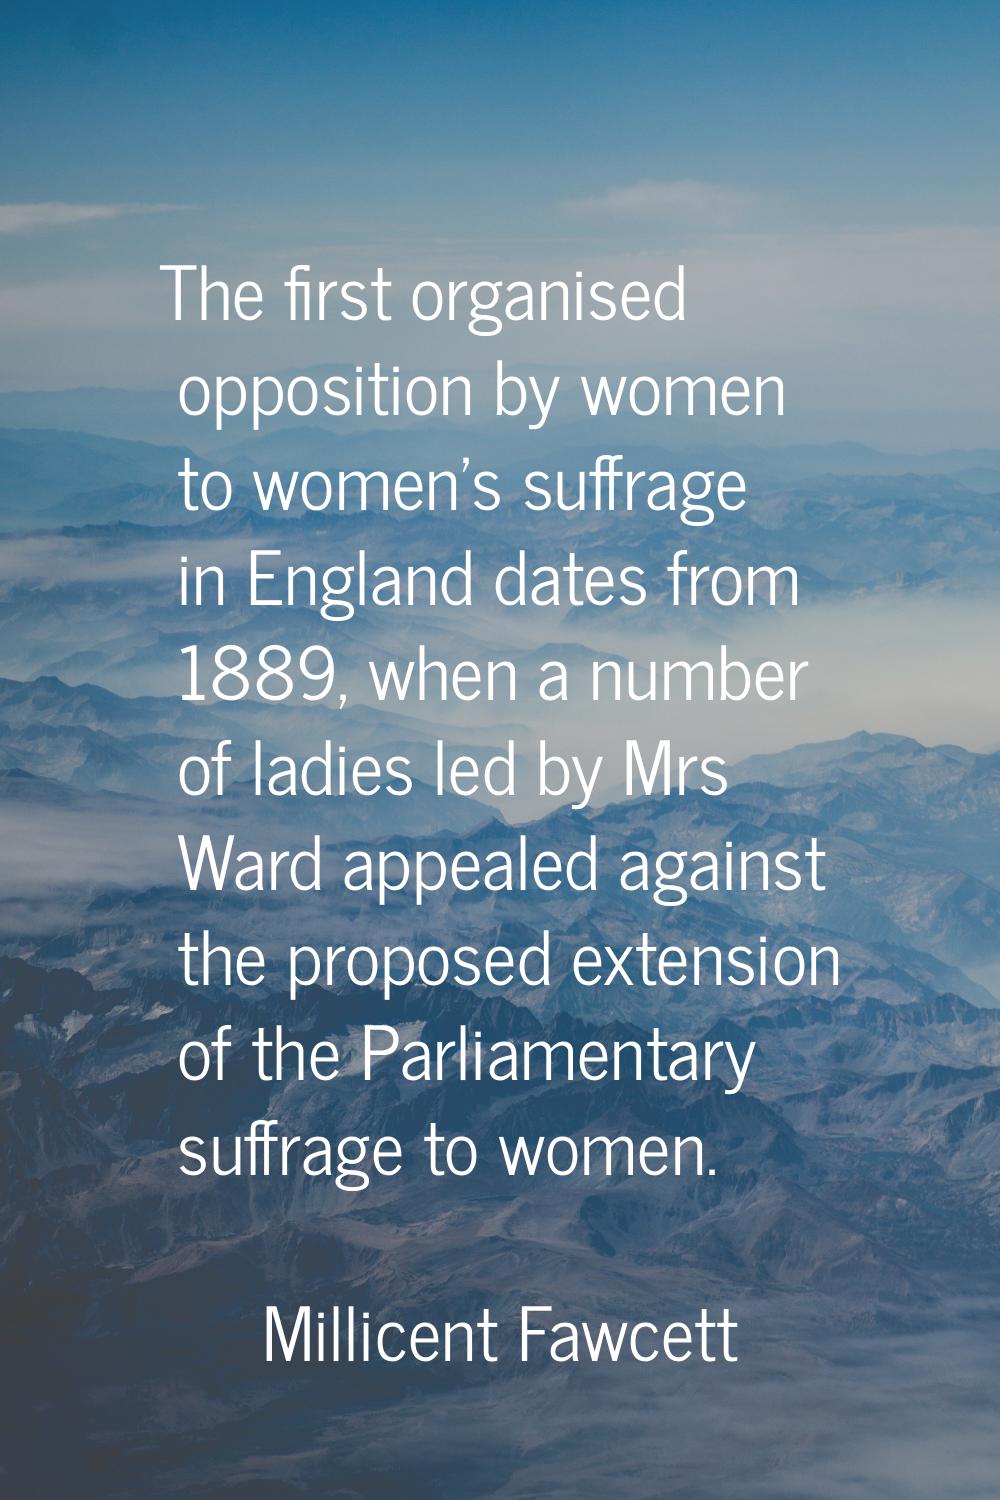 The first organised opposition by women to women's suffrage in England dates from 1889, when a numb